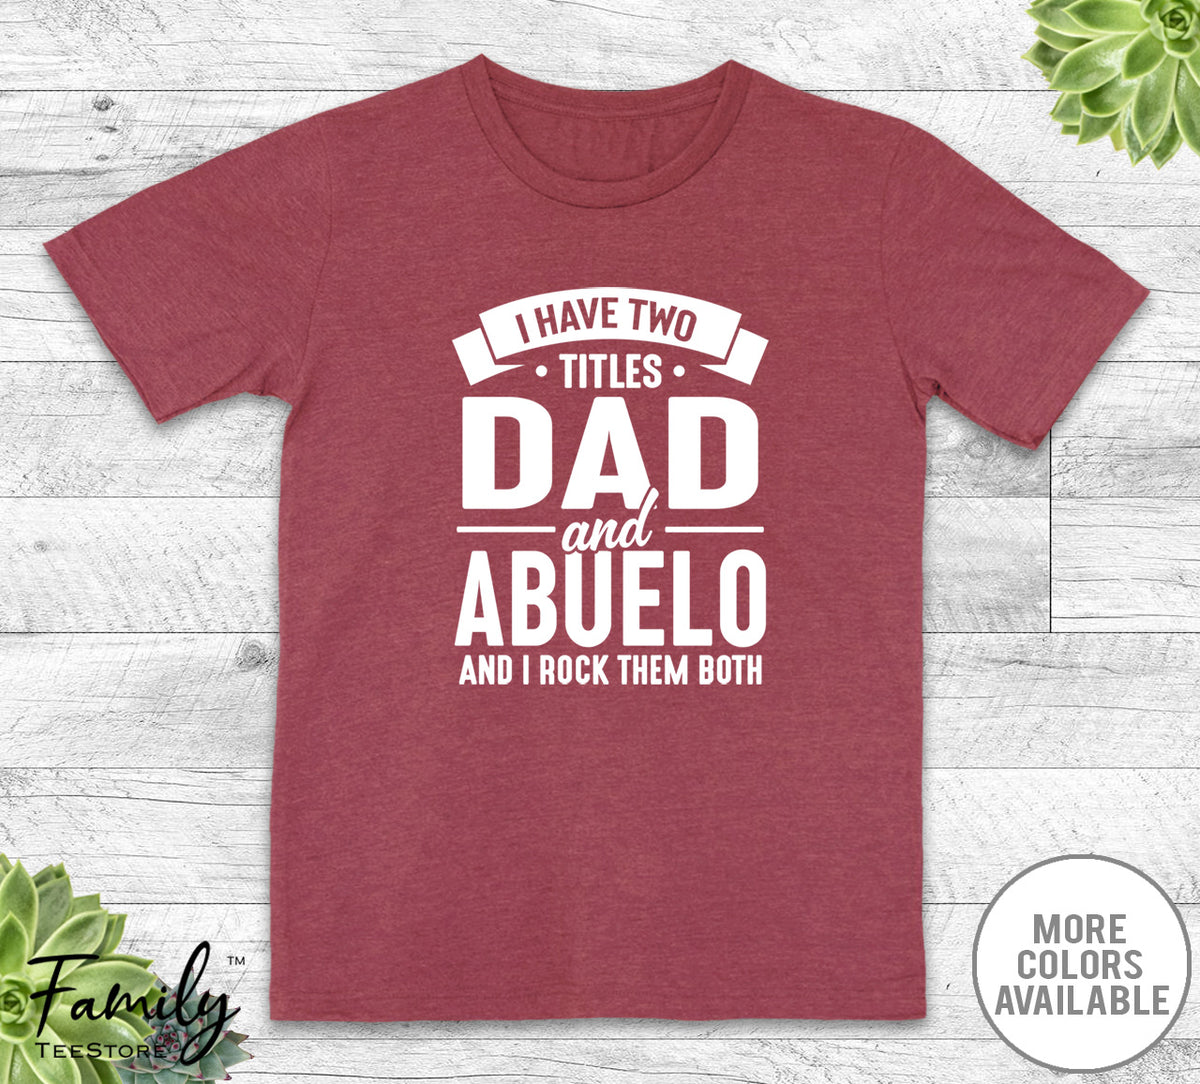 I Have Two Titles Dad And Abuelo - Unisex T-shirt - Abuelo Shirt - Funny Abuelo Gift - familyteeprints